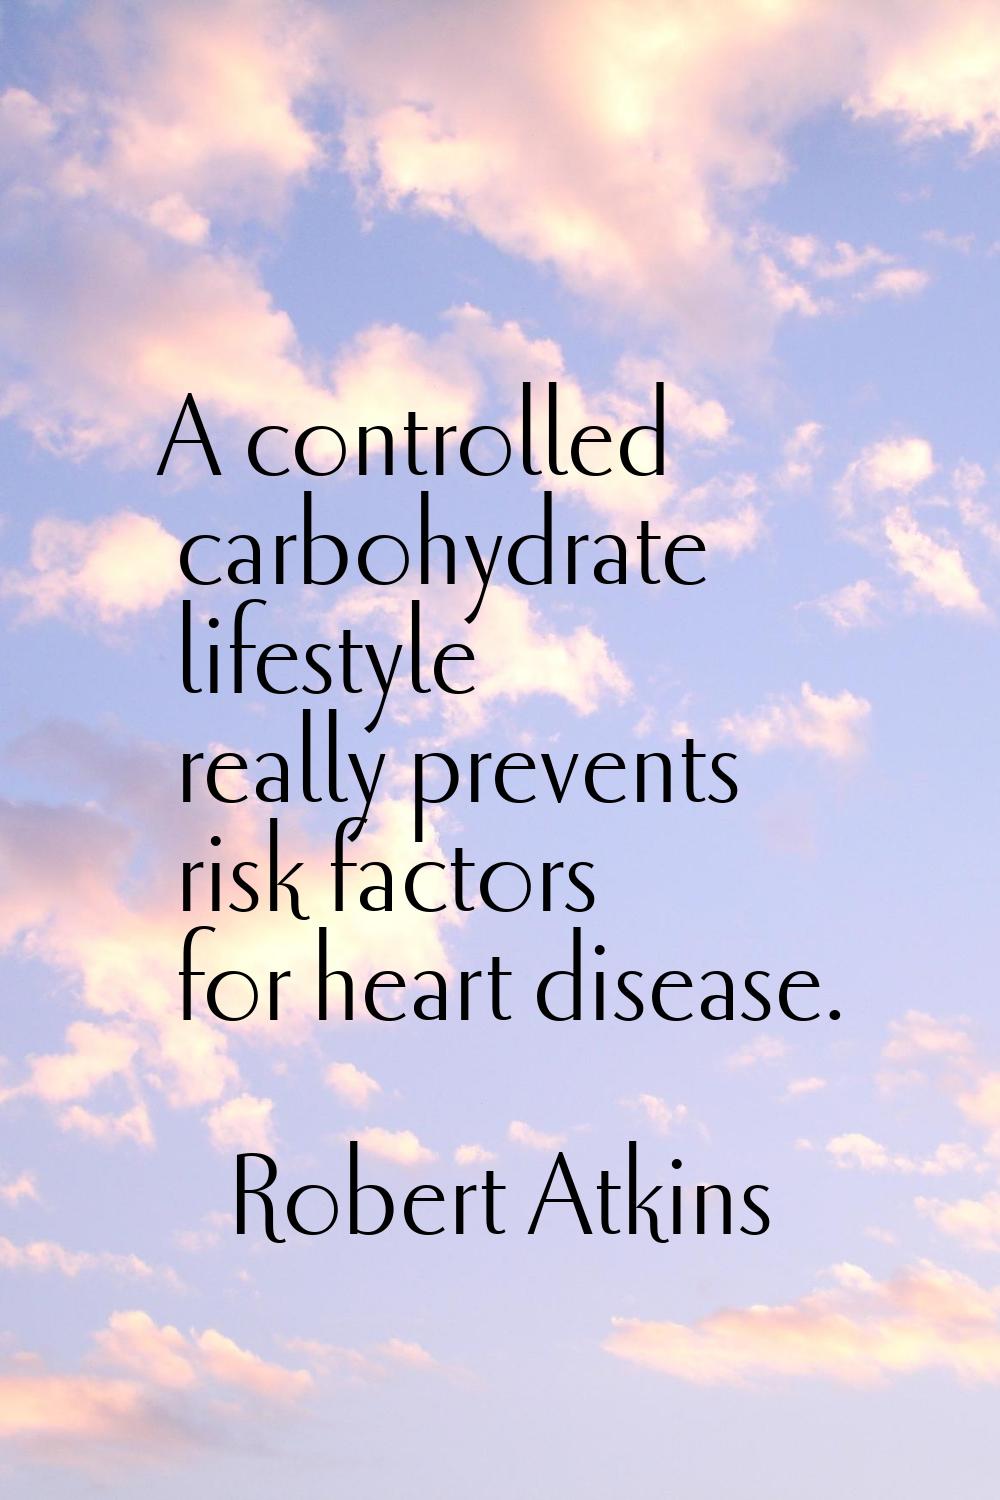 A controlled carbohydrate lifestyle really prevents risk factors for heart disease.